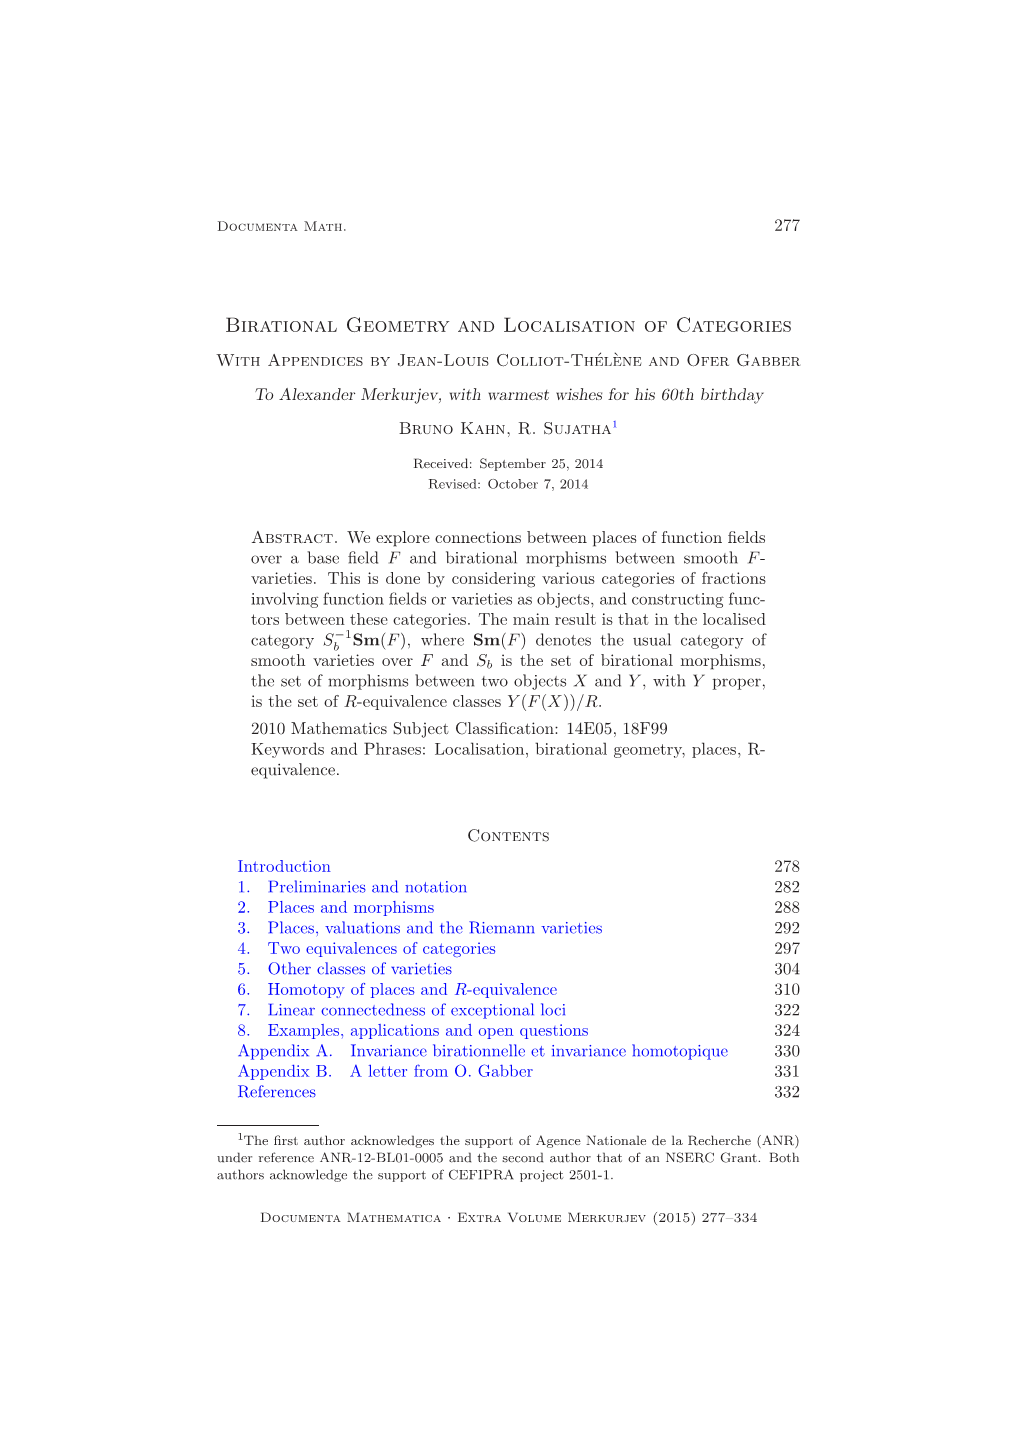 Birational Geometry and Localisation of Categories with Appendices by Jean-Louis Colliot-Thel´ Ene` and Ofer Gabber